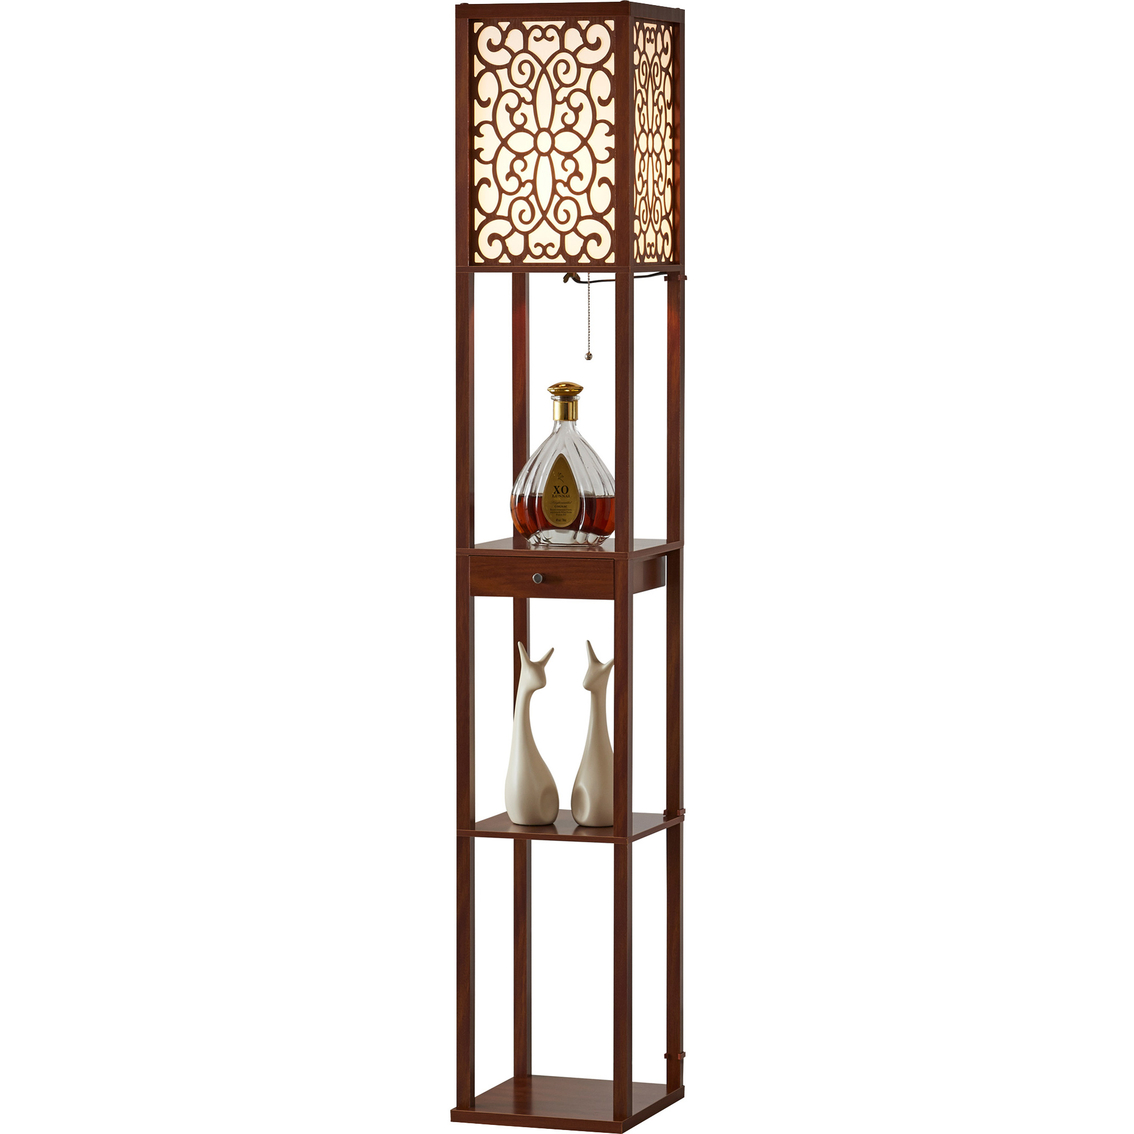 Artiva USA Etagere 63 in. Dark Walnut Shelf Floor lamp with Shade and Drawer - Image 2 of 4